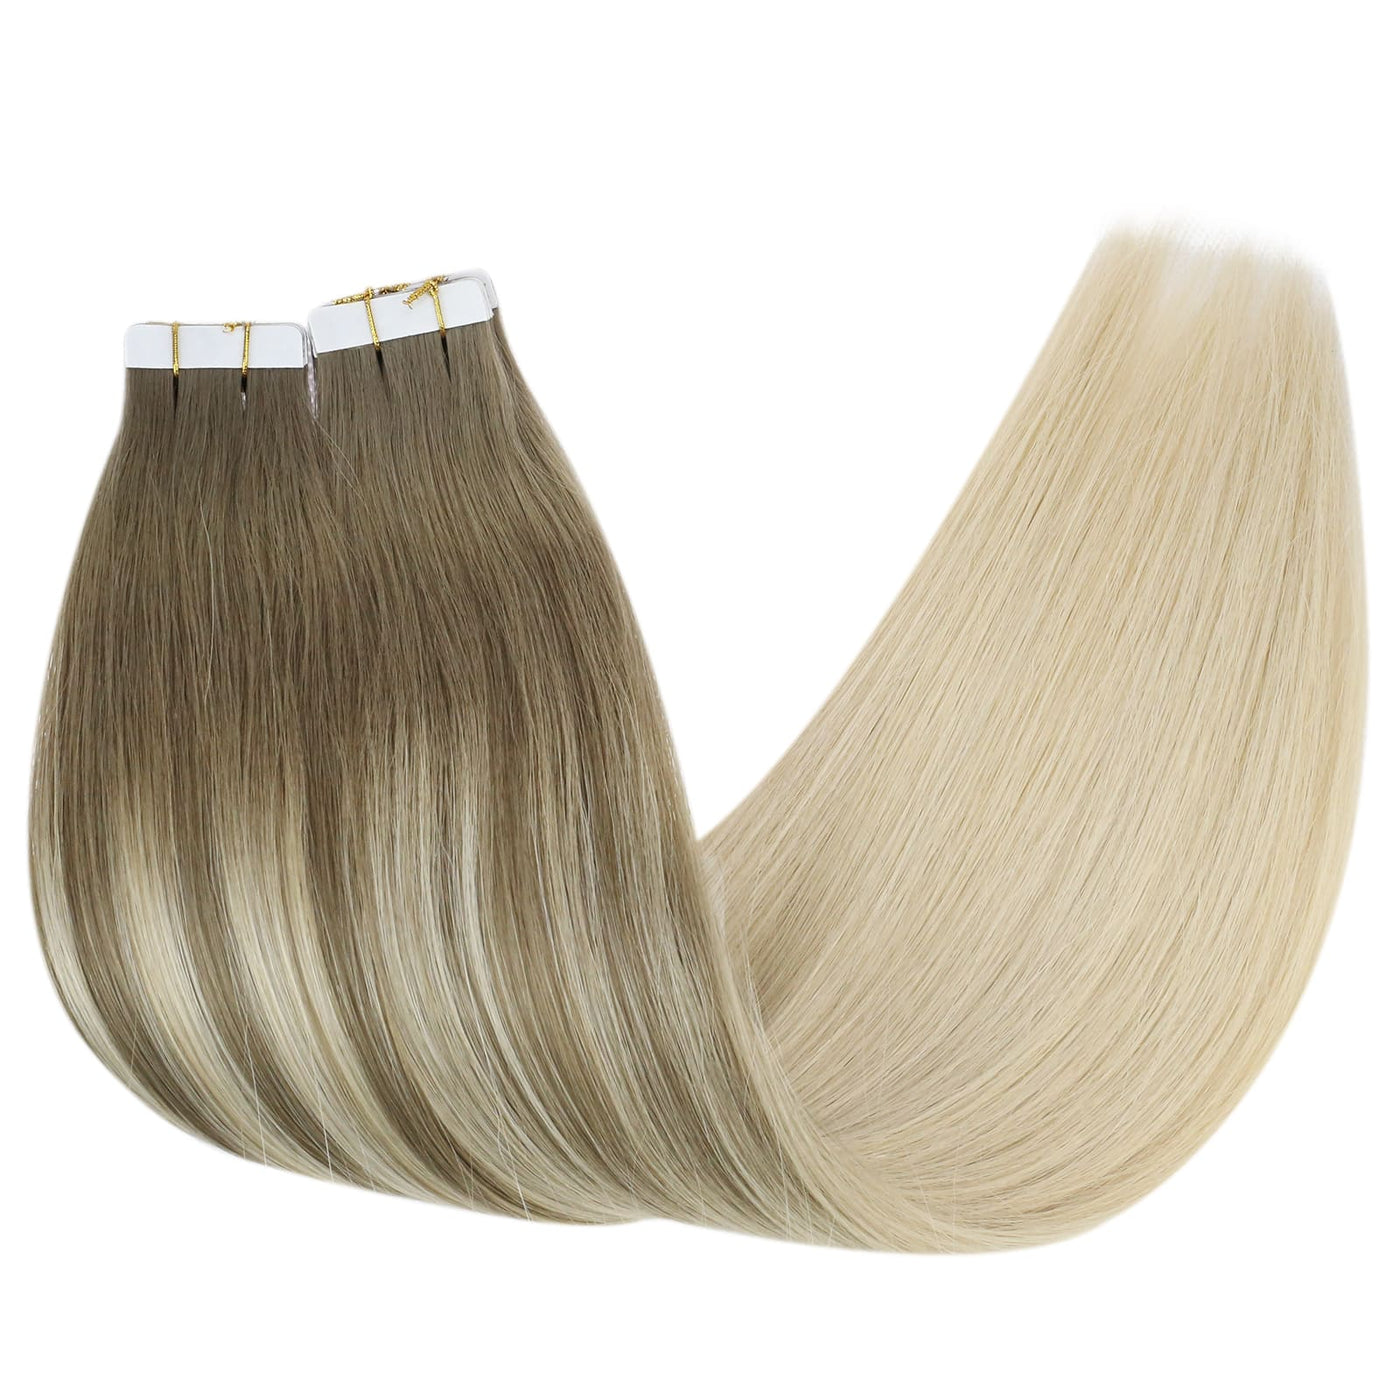 8A quality hair extensions